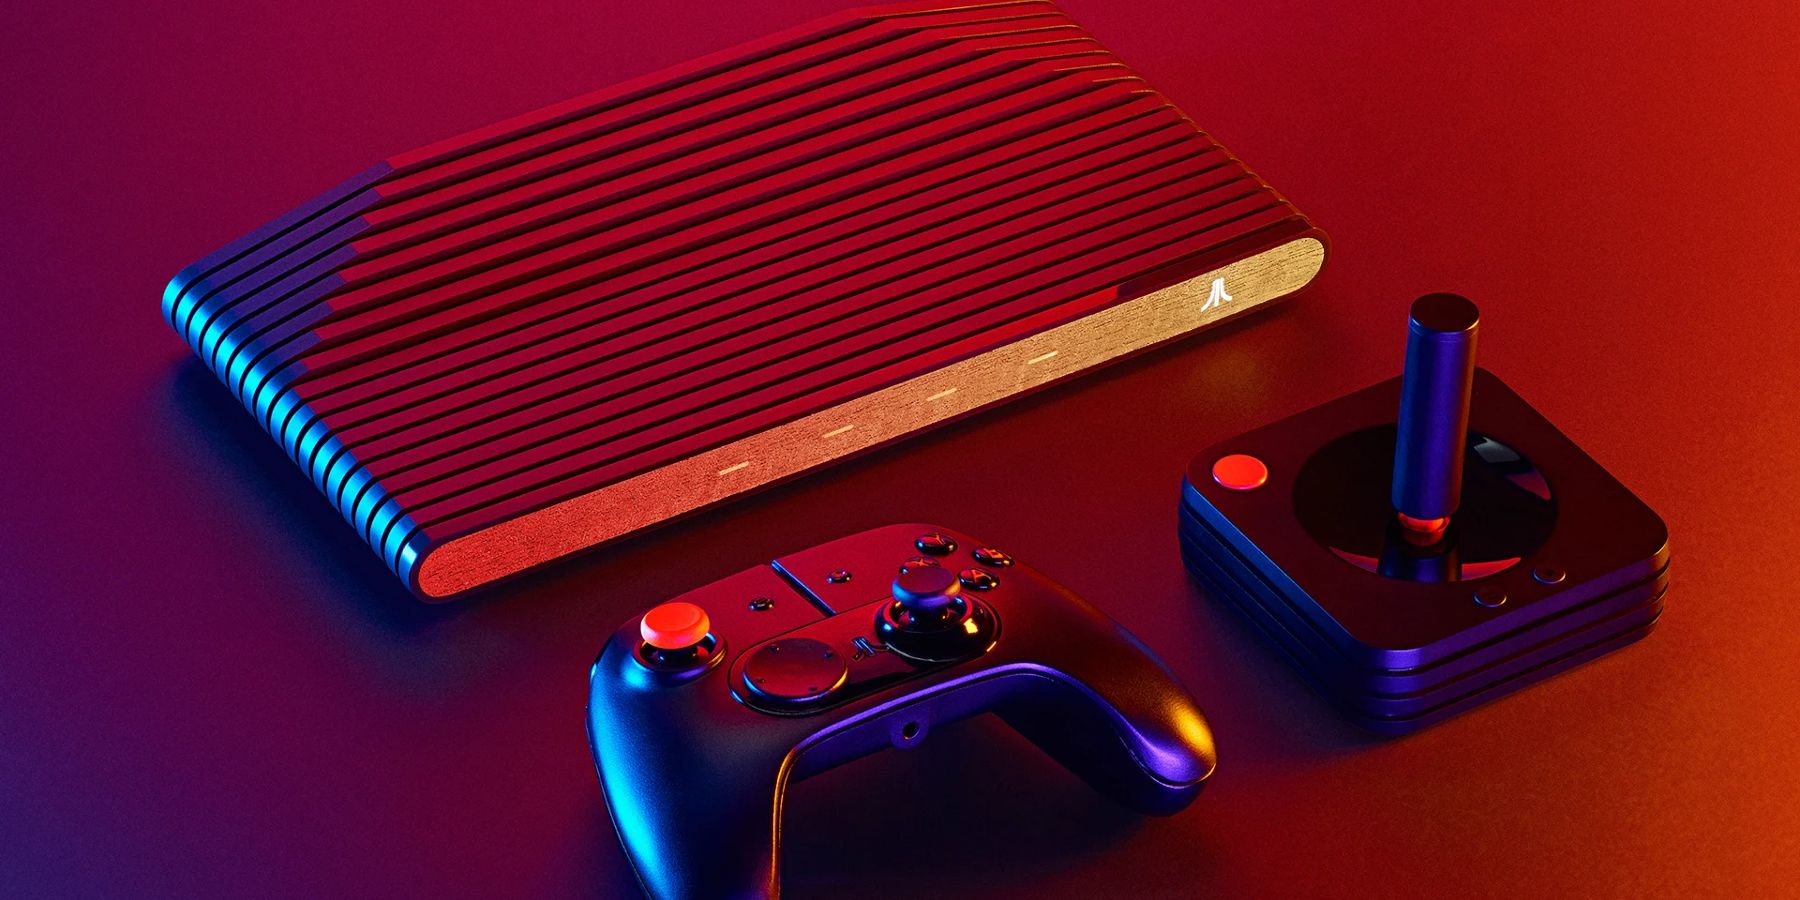 atari vcs console and controllers